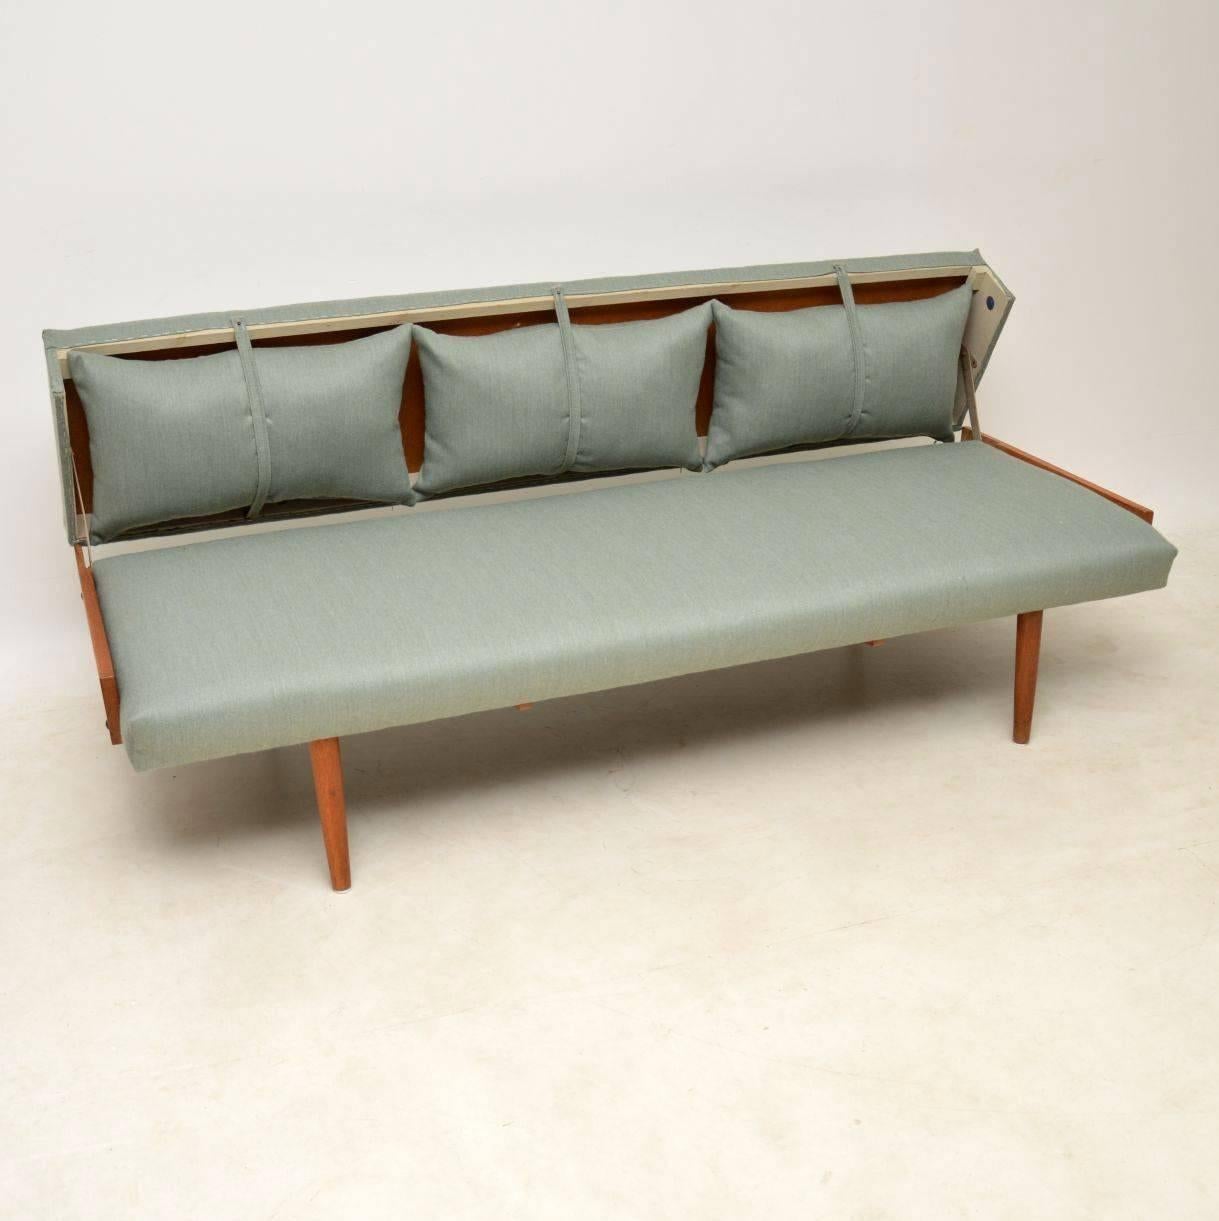 A beautiful and very practical vintage Danish sofa bed, this dates from the 1950s-1960s. This has an unusual design, it comes with three loose cushions that can be used on the front or stored in the back when not needed, held in place by fabric